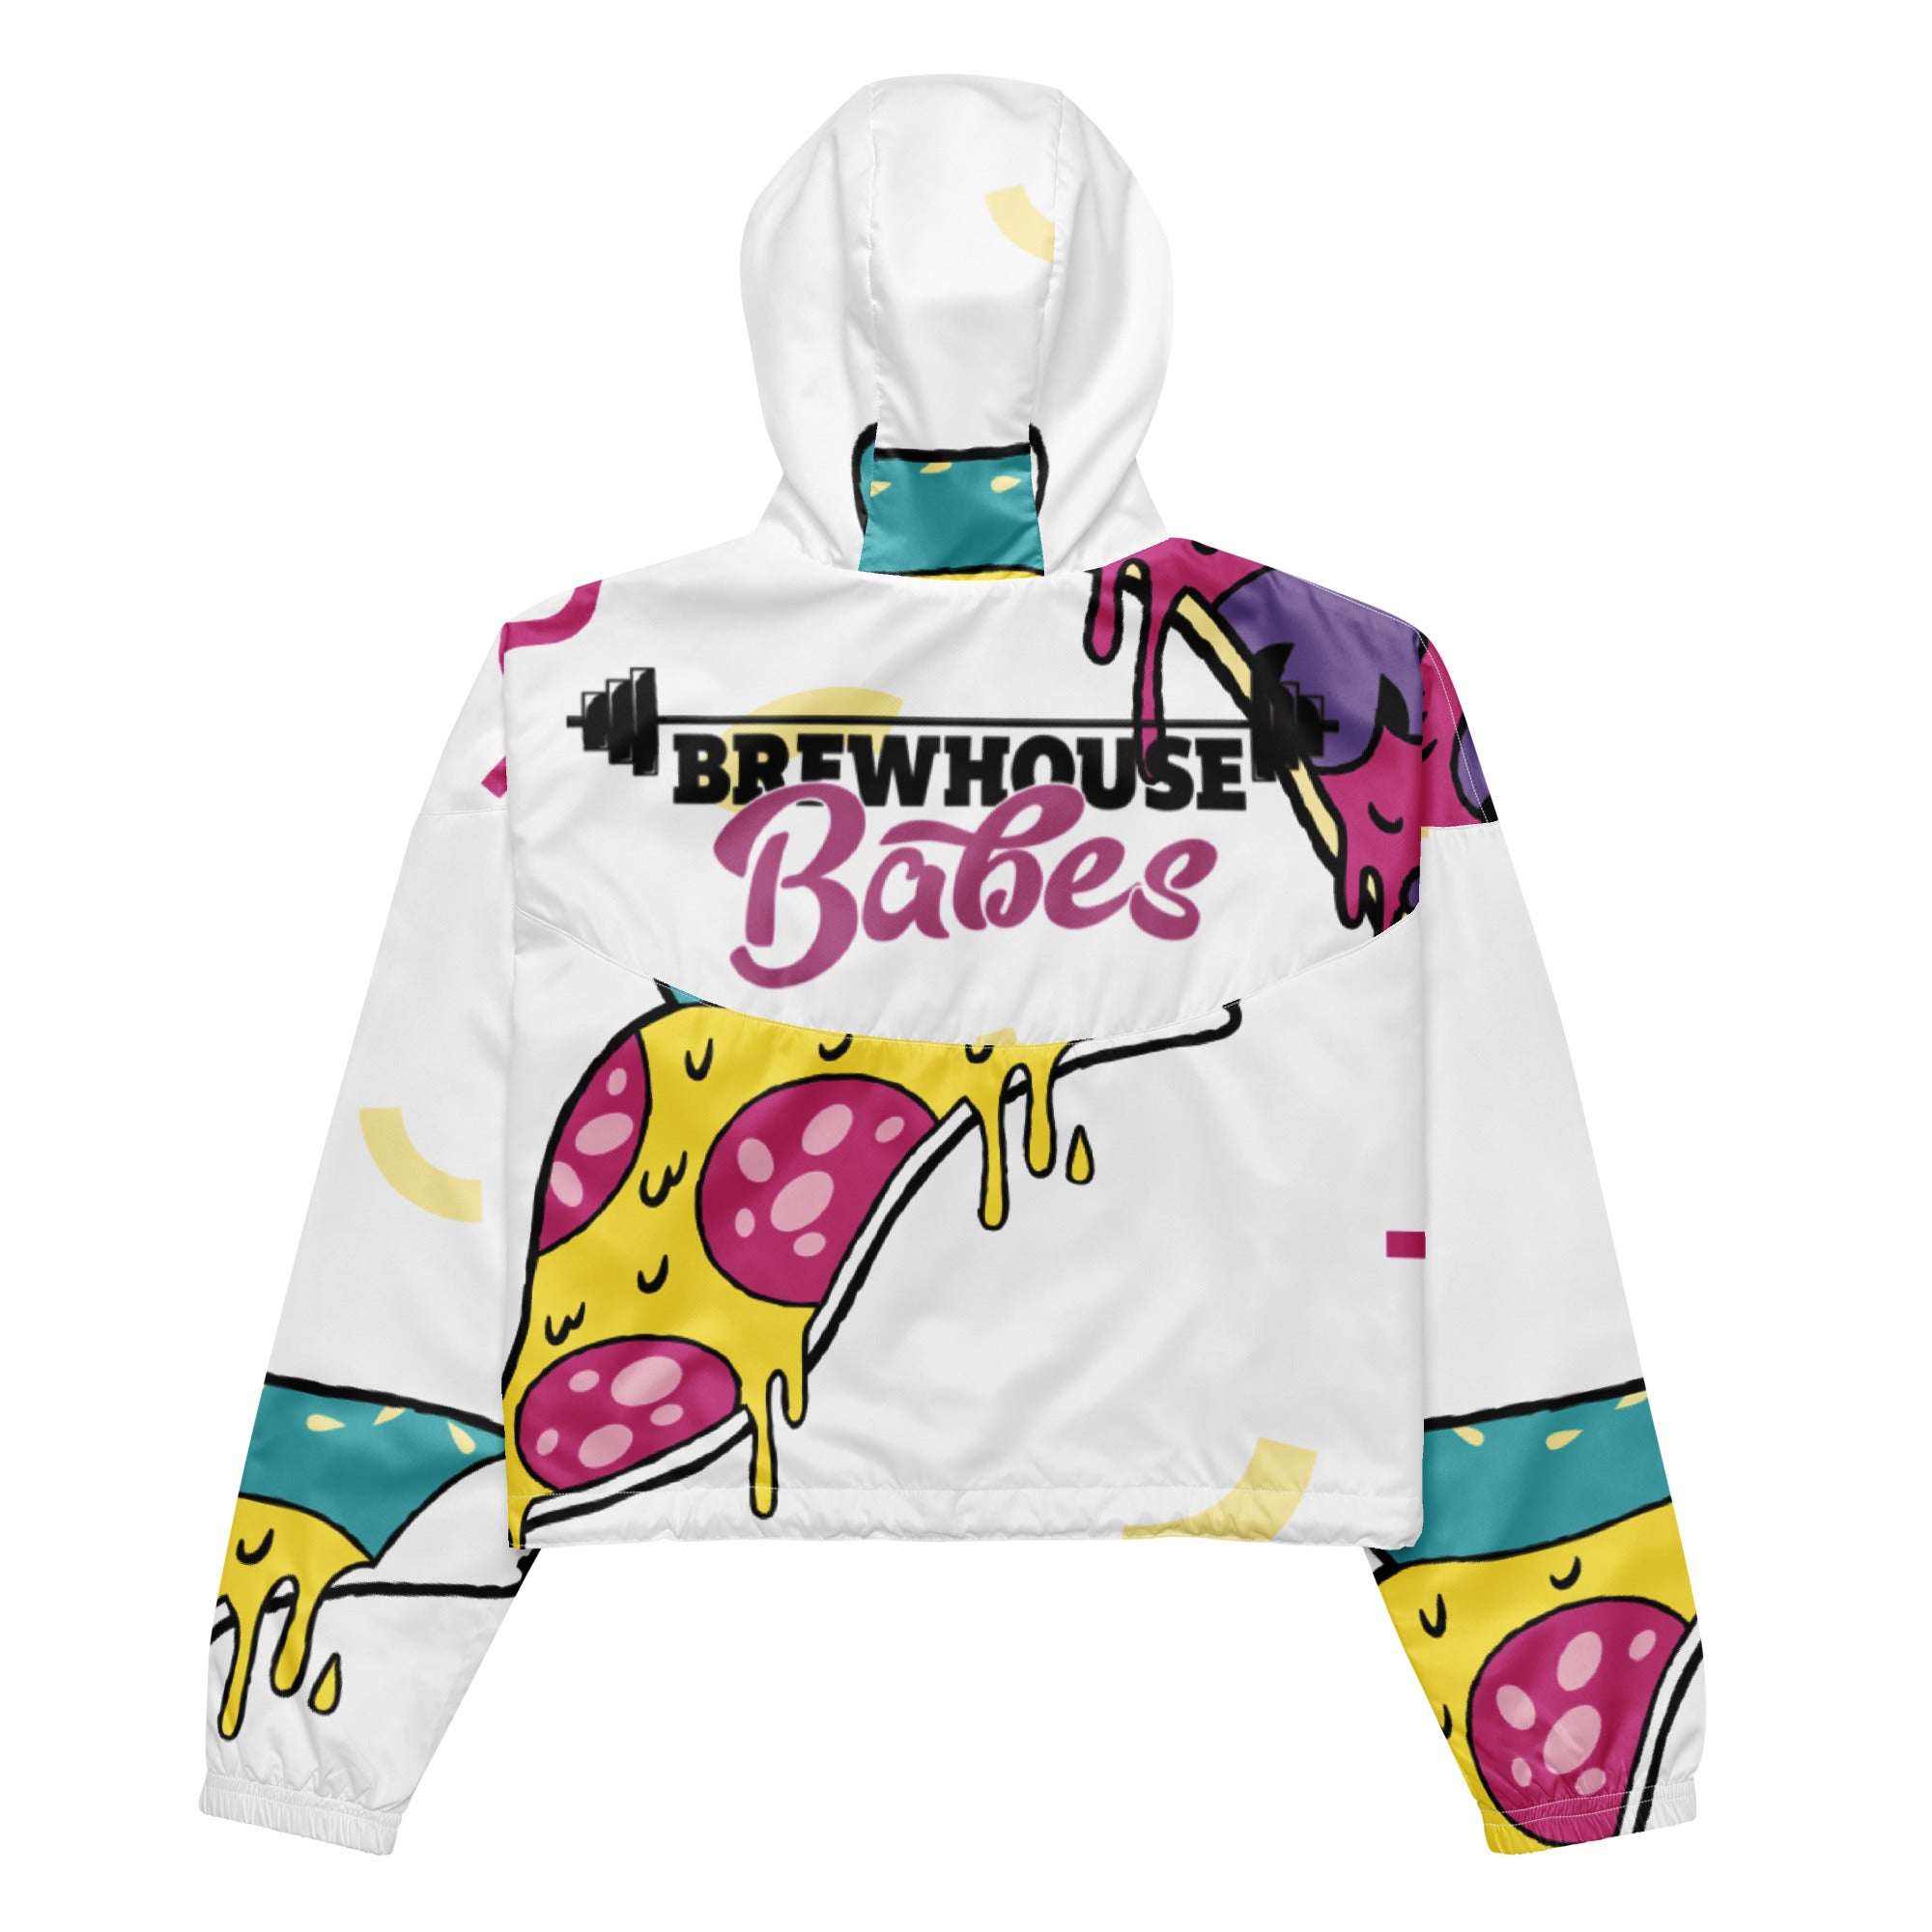 Brewhouse Barbell Cropped Windbreaker